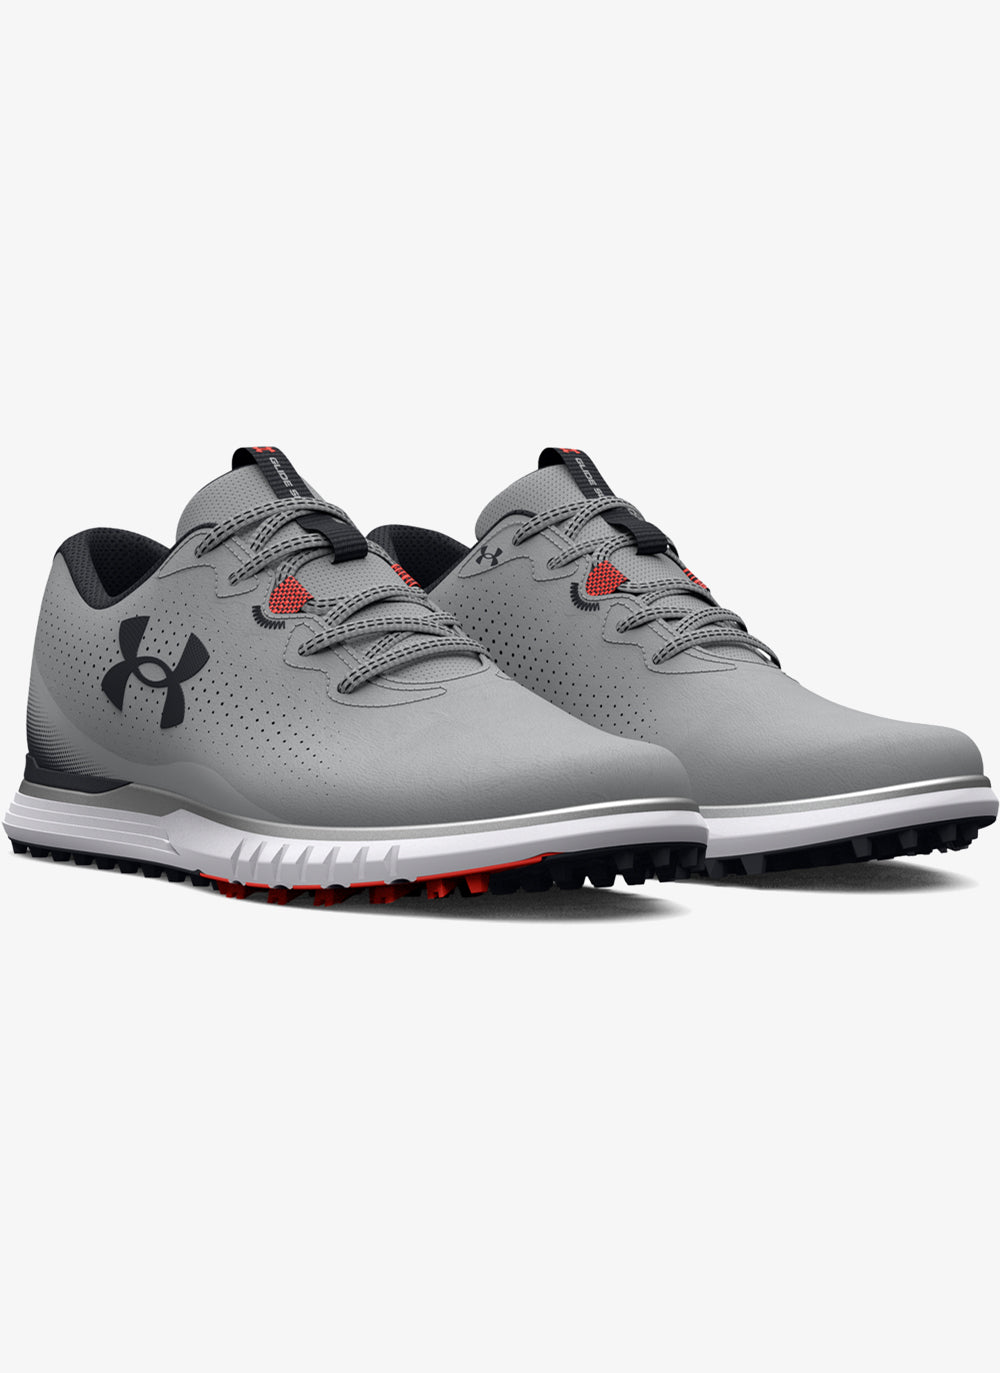 Under Armour Glide 2 SL Golf Shoes 3026402